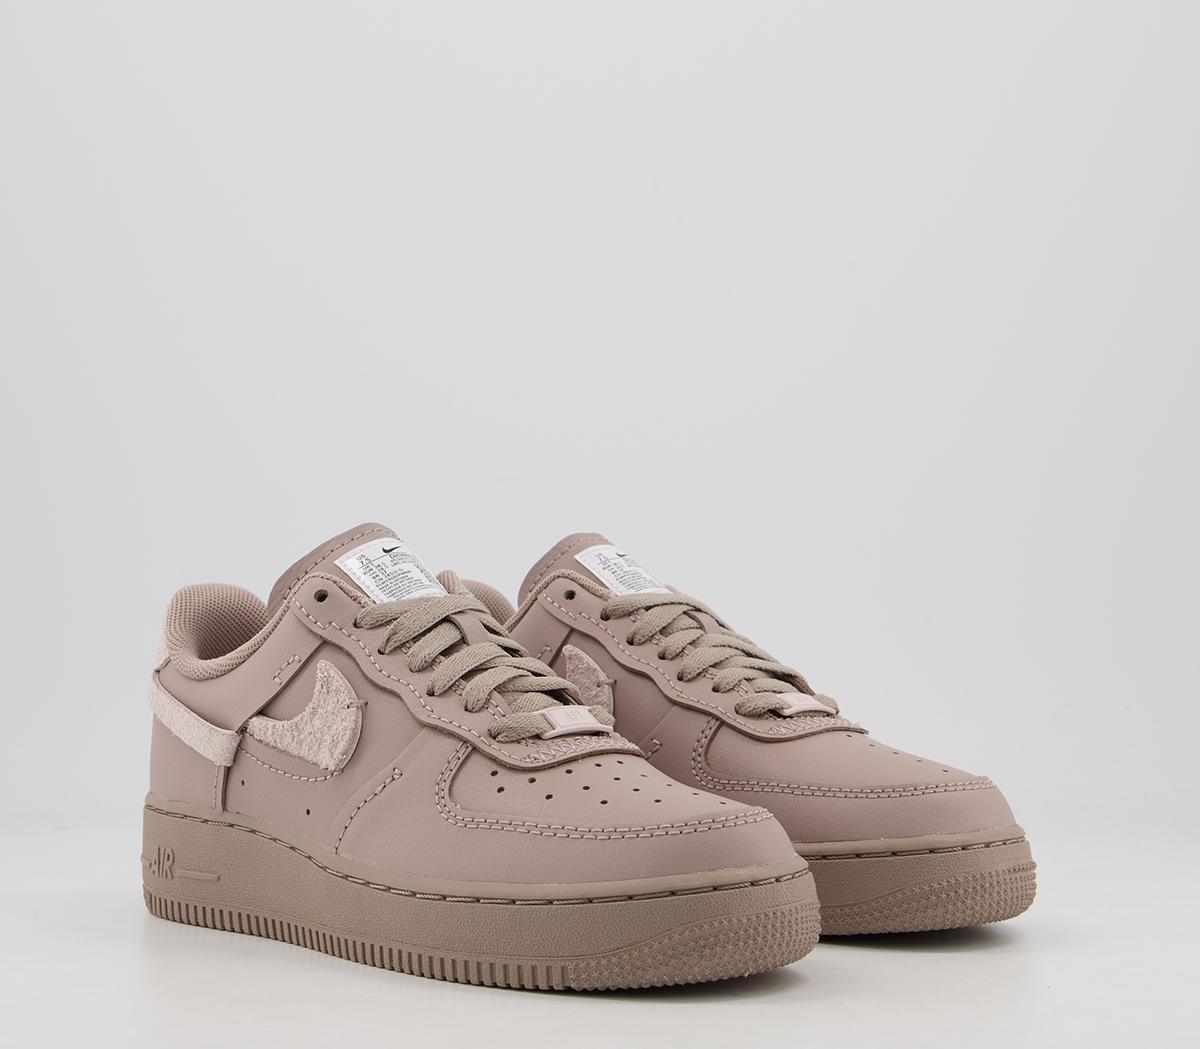 Nike Air Force 1 07 Trainers Malt Platinum Violet Lxx - Hers trainers